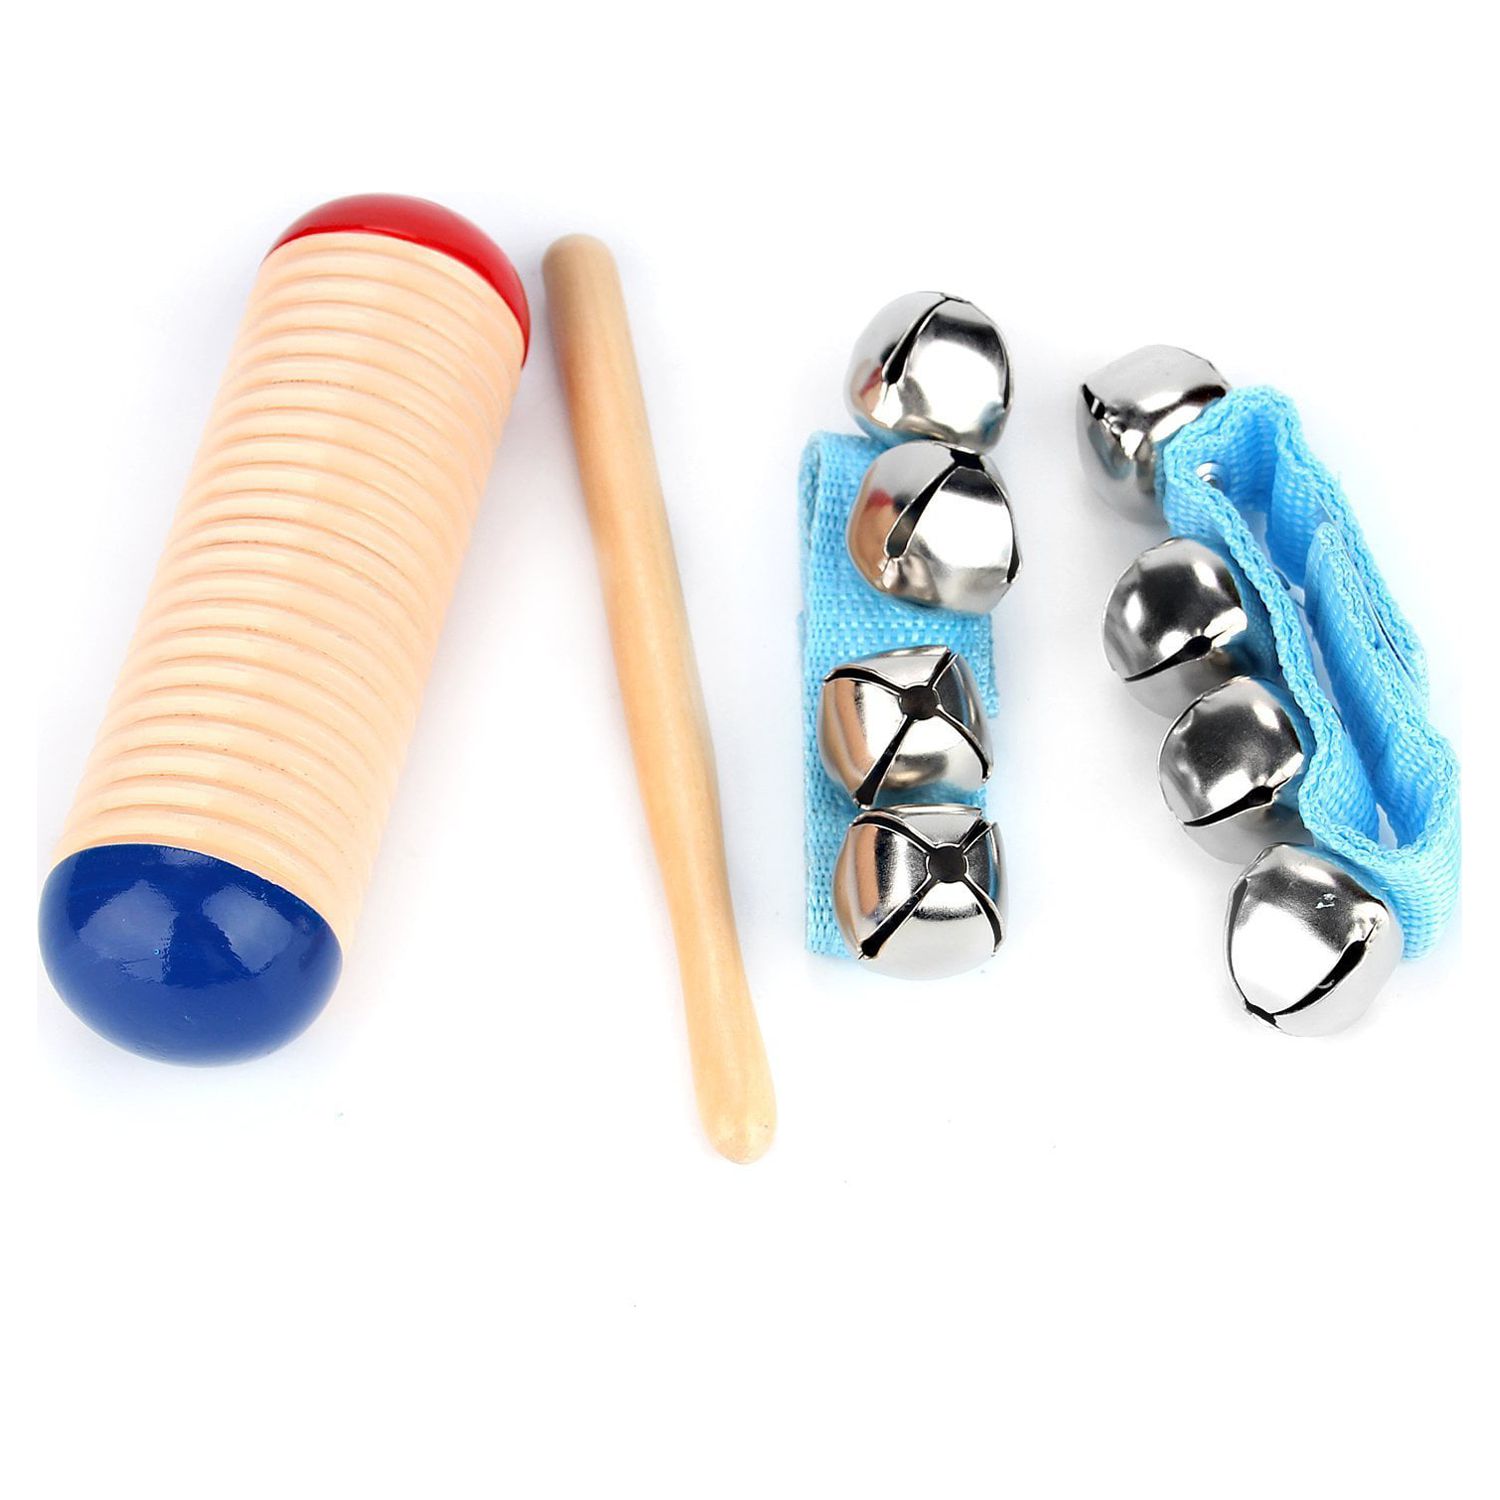 Musical Instruments Set of 16 PCS by Boxiki Kids. Rhythm & Musical Toys for Toddlers 1-3 Years Old. Includes Clave Sticks, Shakers, Tambourine, Wrist Bells & Maracas for Kids. - image 2 of 15